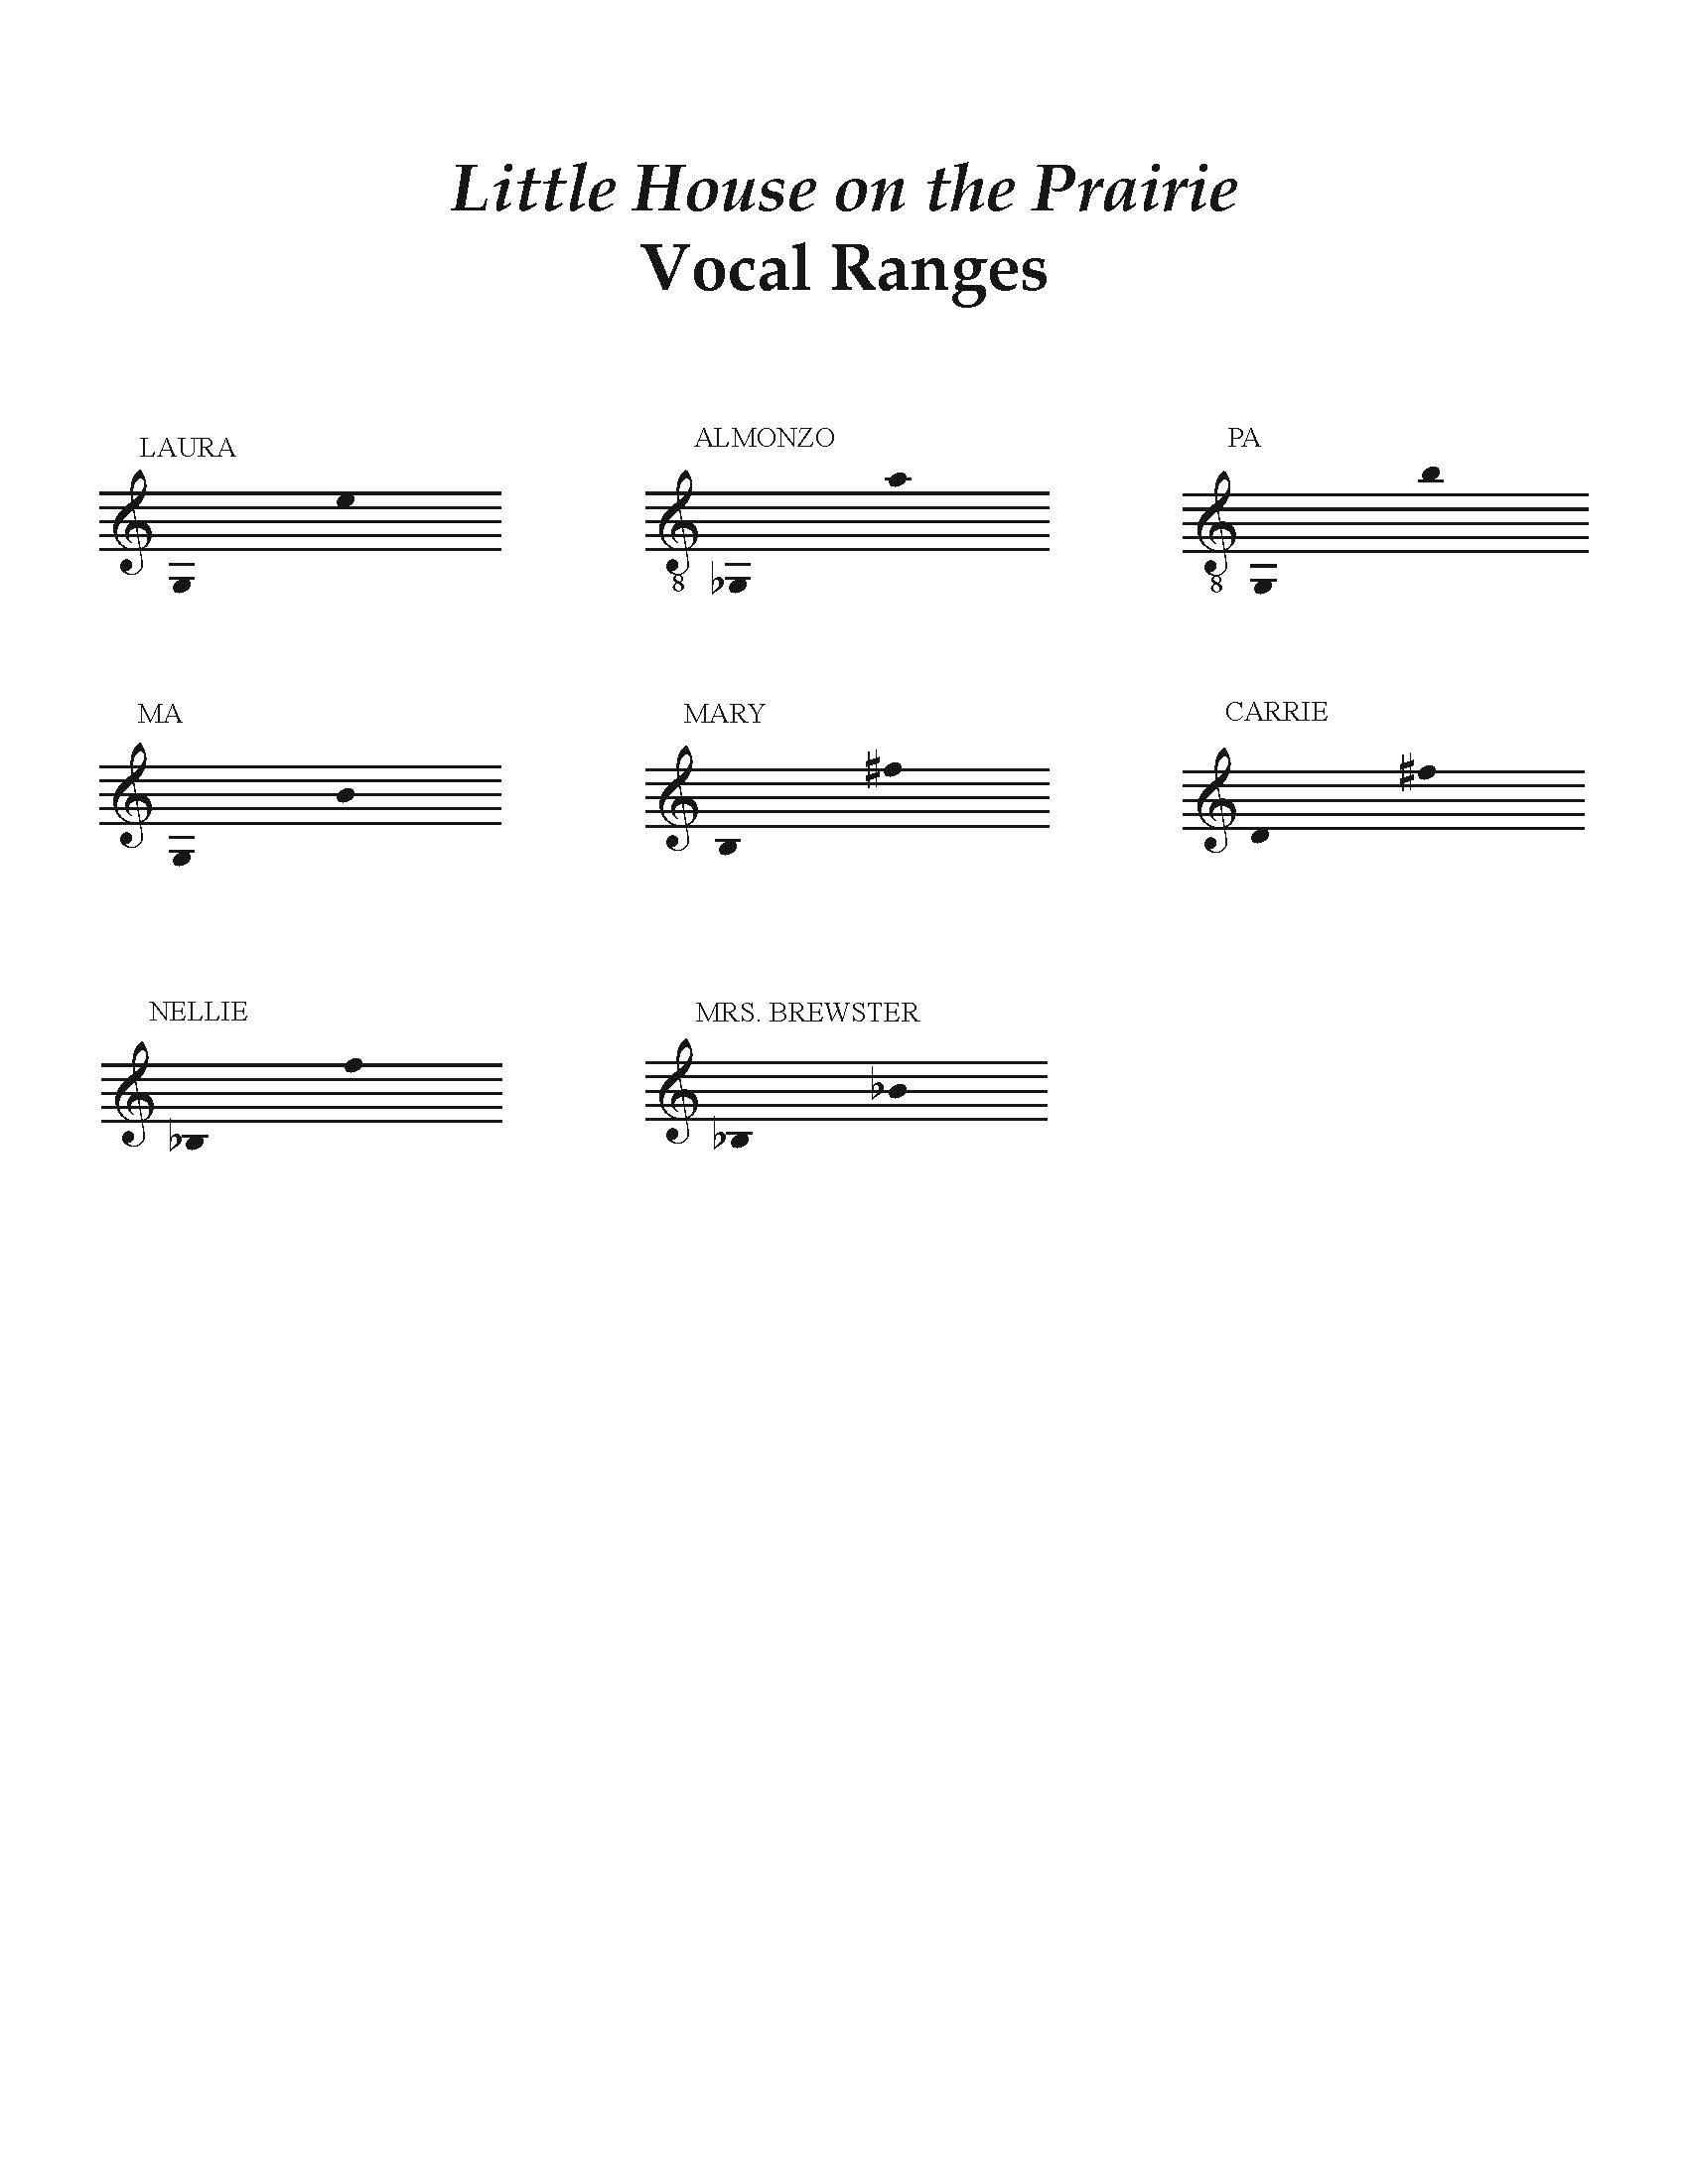 Little House on the Prairie – Outdoor Collection Vocal Ranges